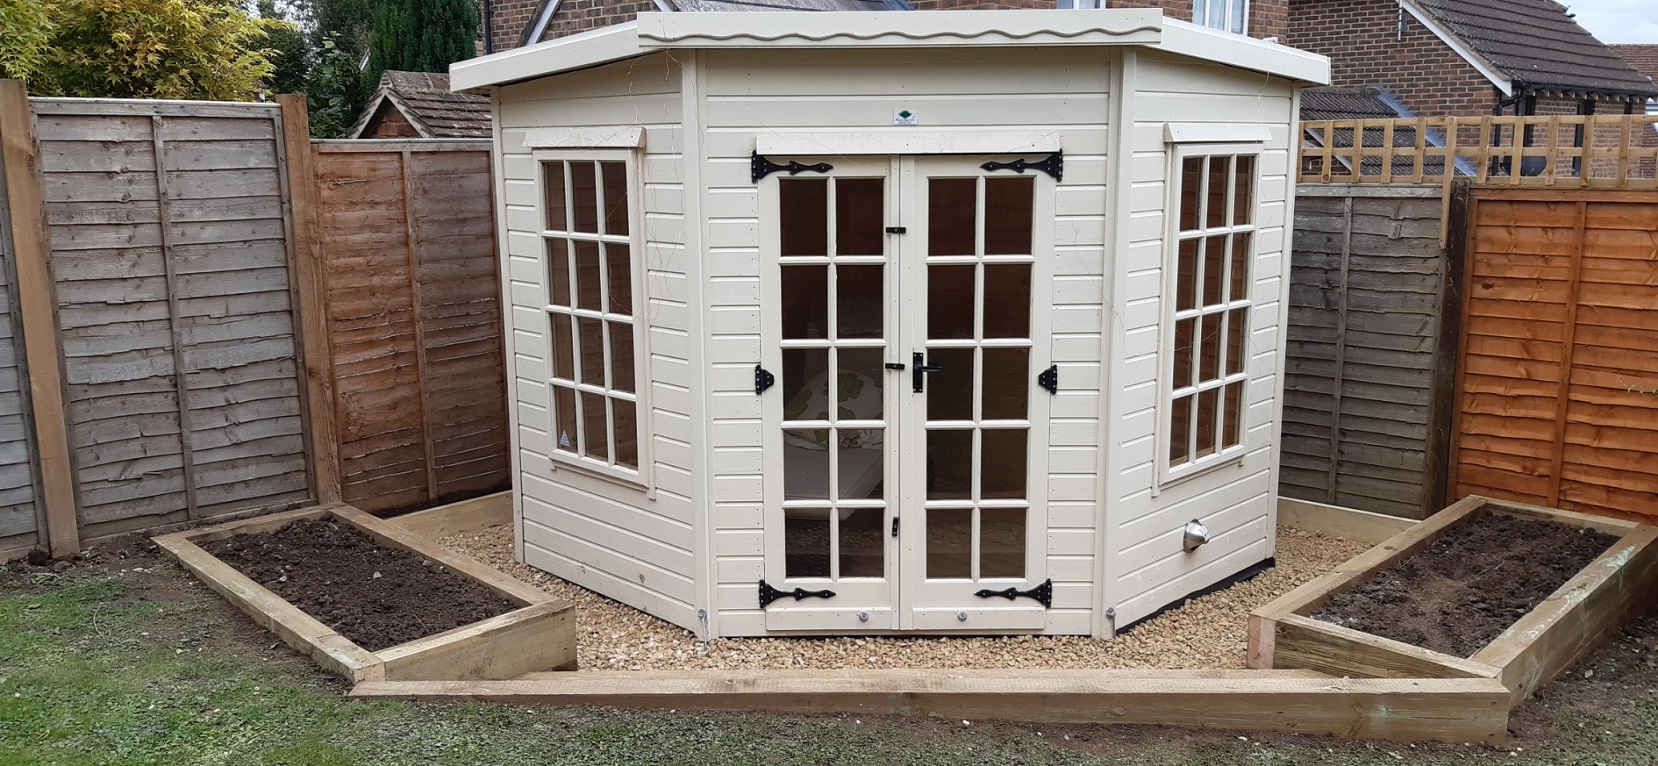 Summerhouse in Bearsted after addition of raised beds and path